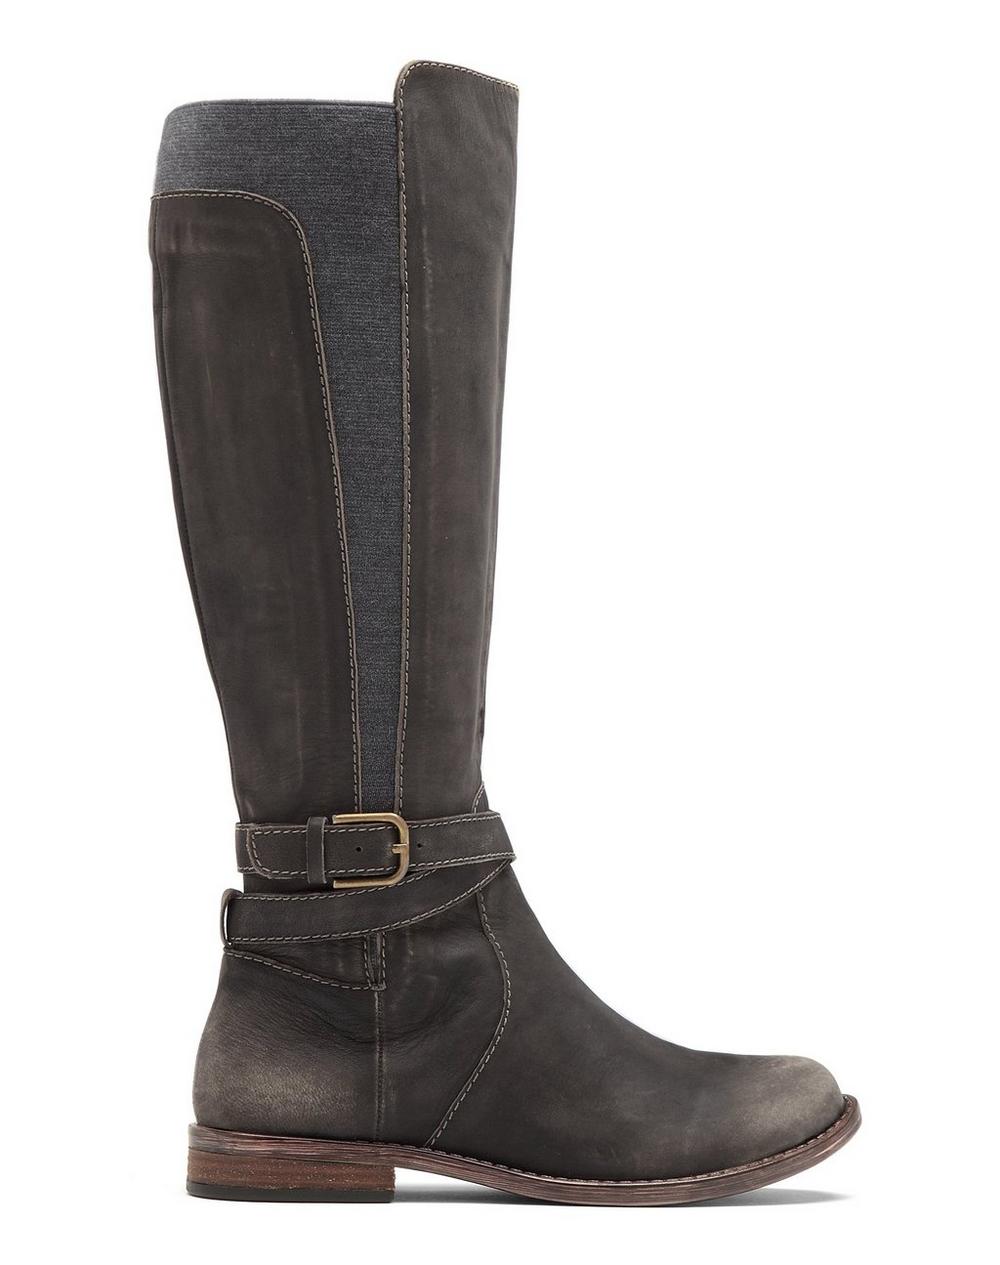 OSTRAND RIDING BOOT, image 2